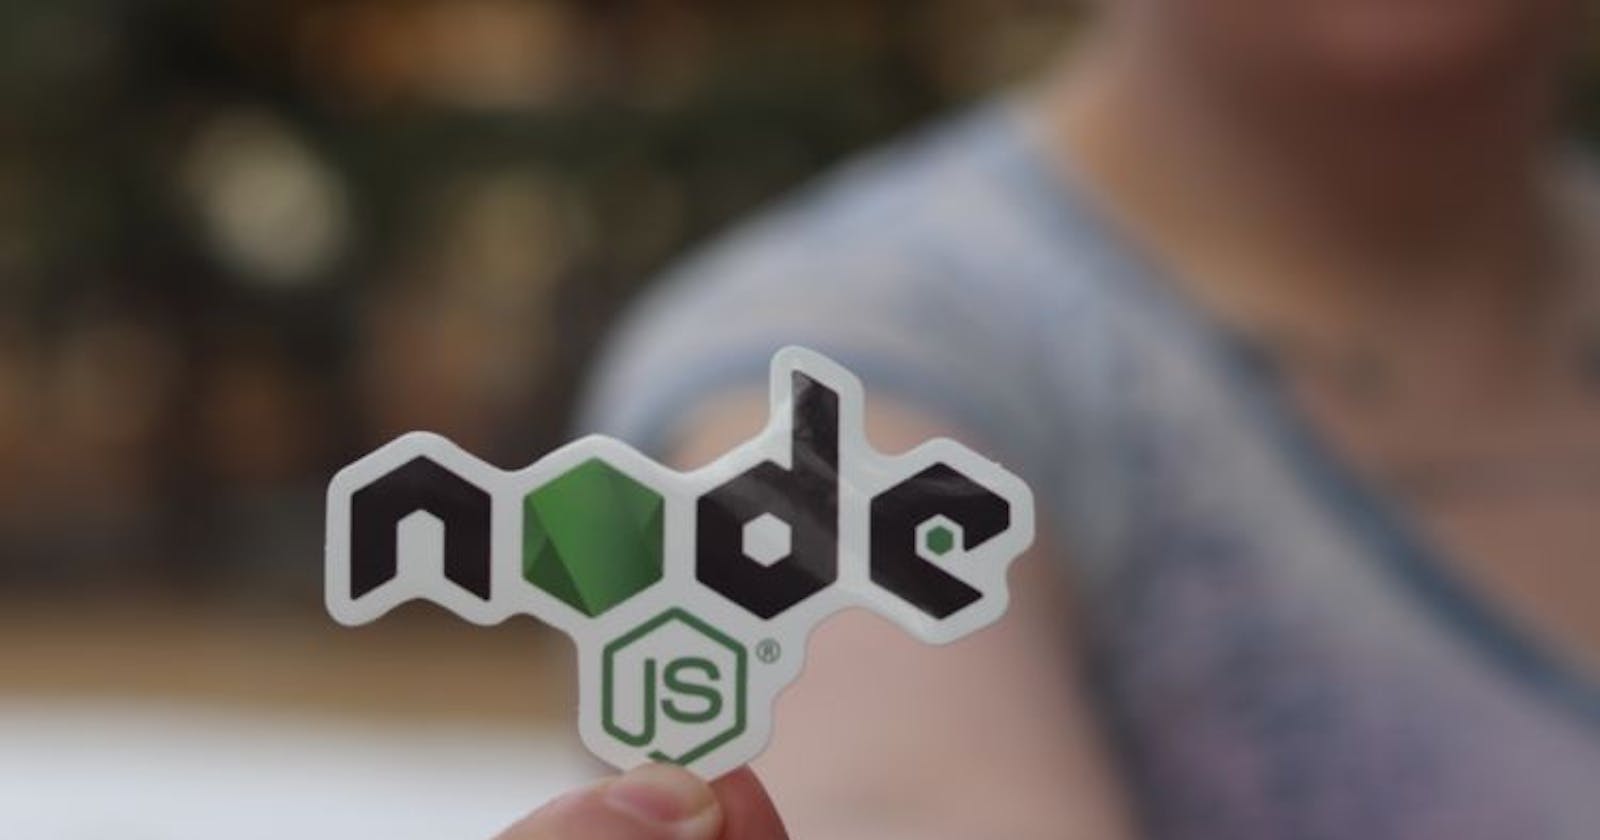 Installing Node Server on Your PC: A Step-by-Step Guide